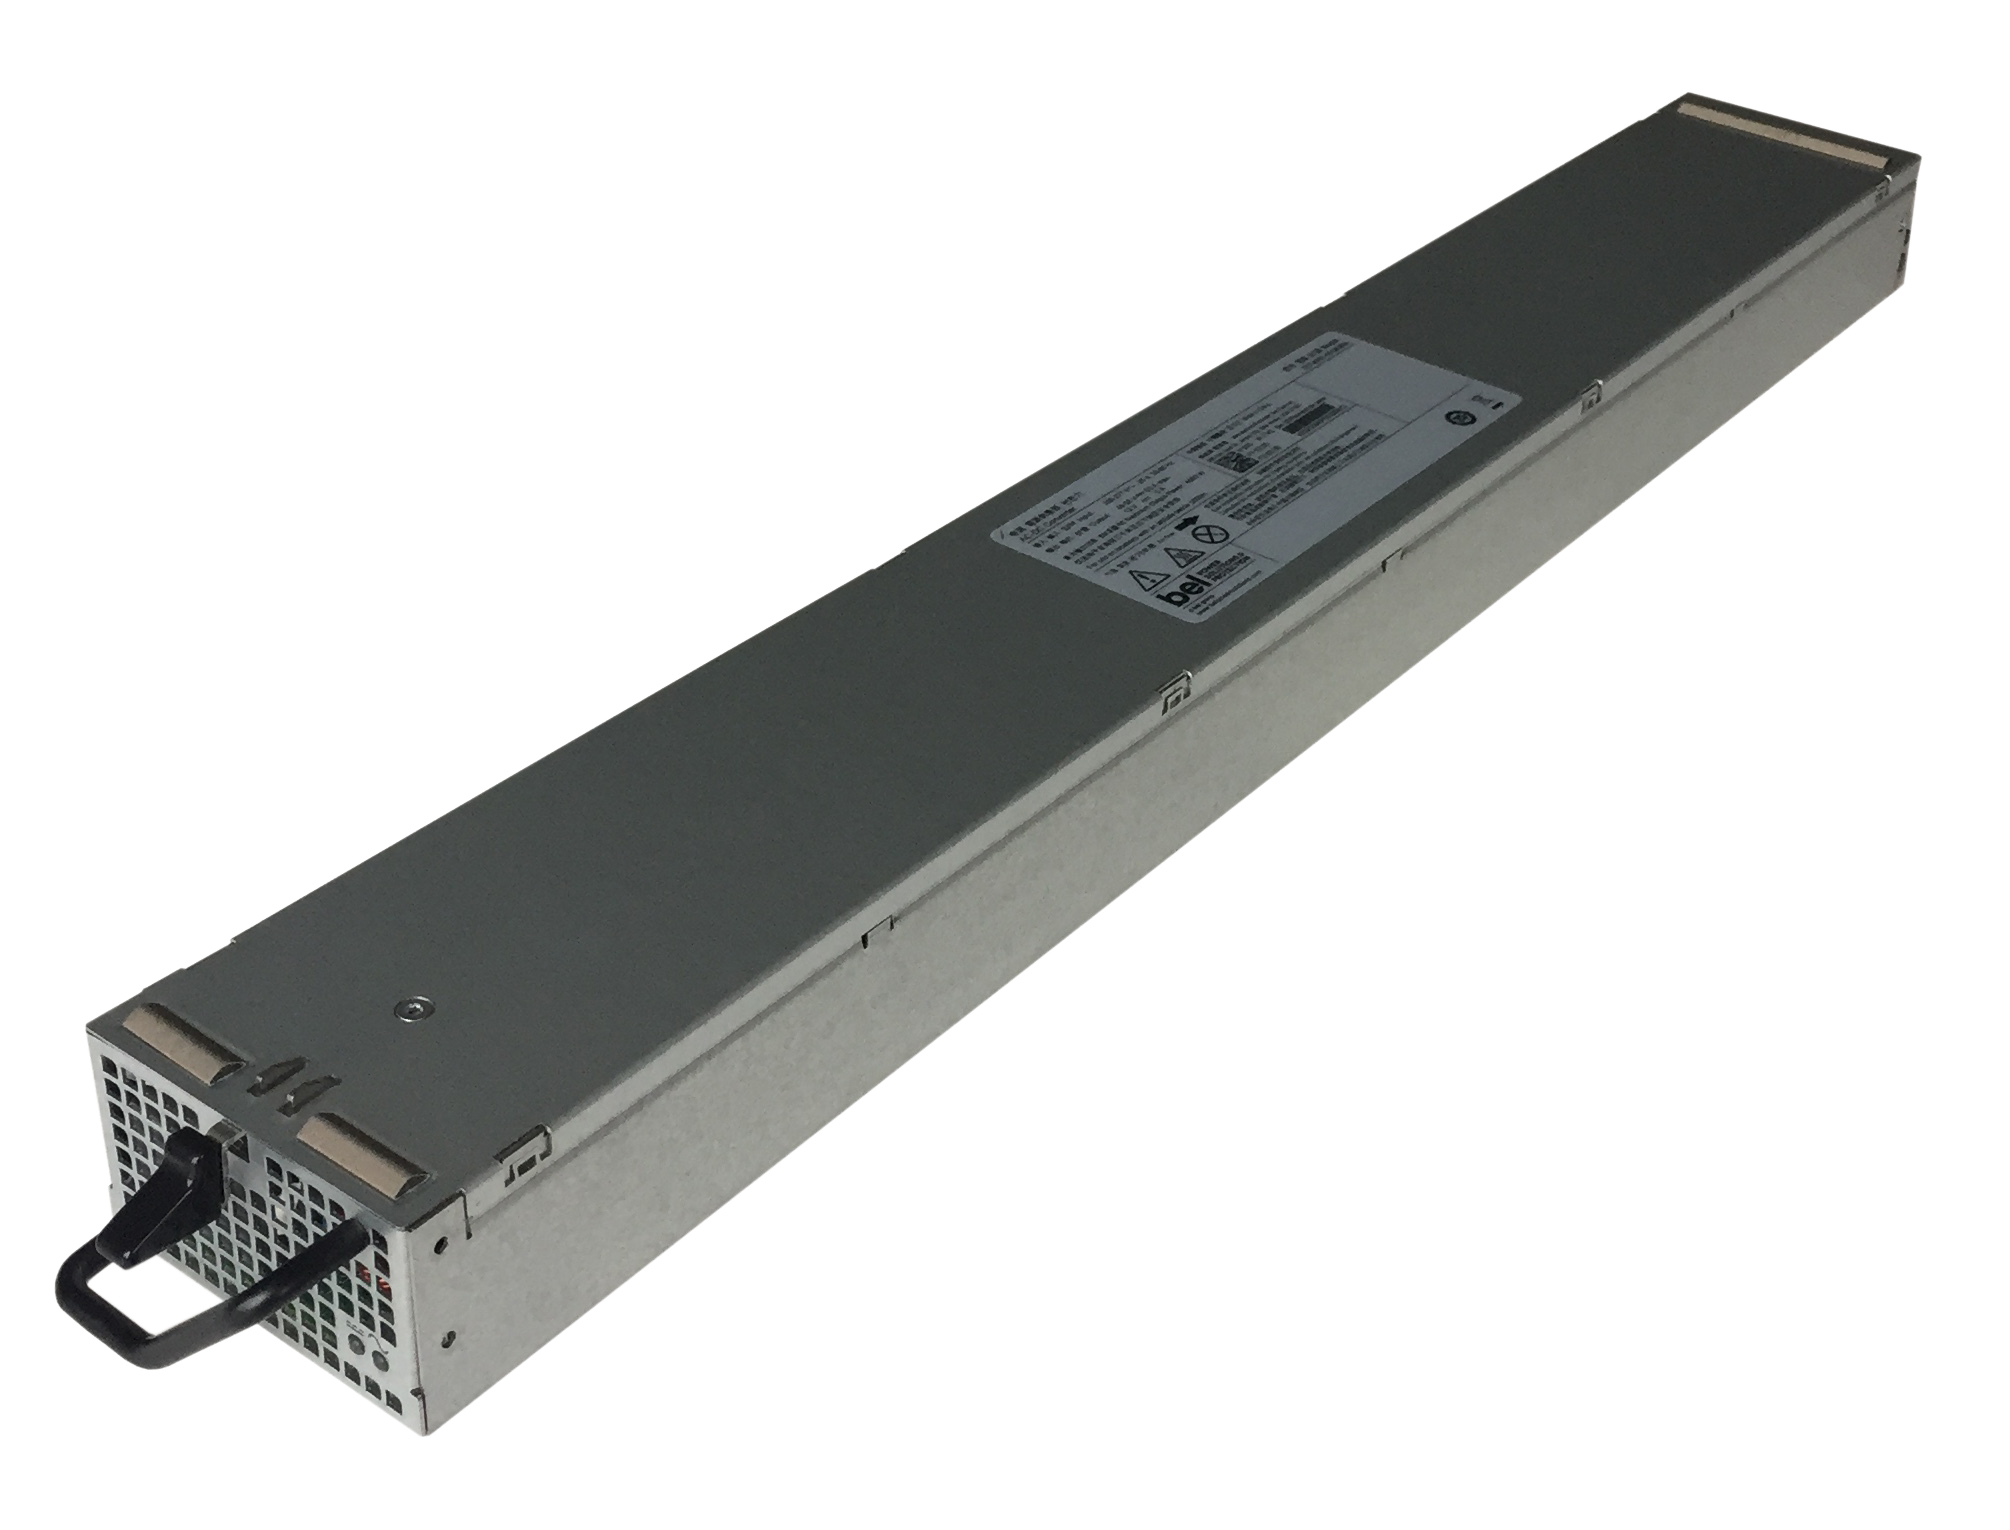 4 kW Power Supply for OCP, CORD and Datacenters